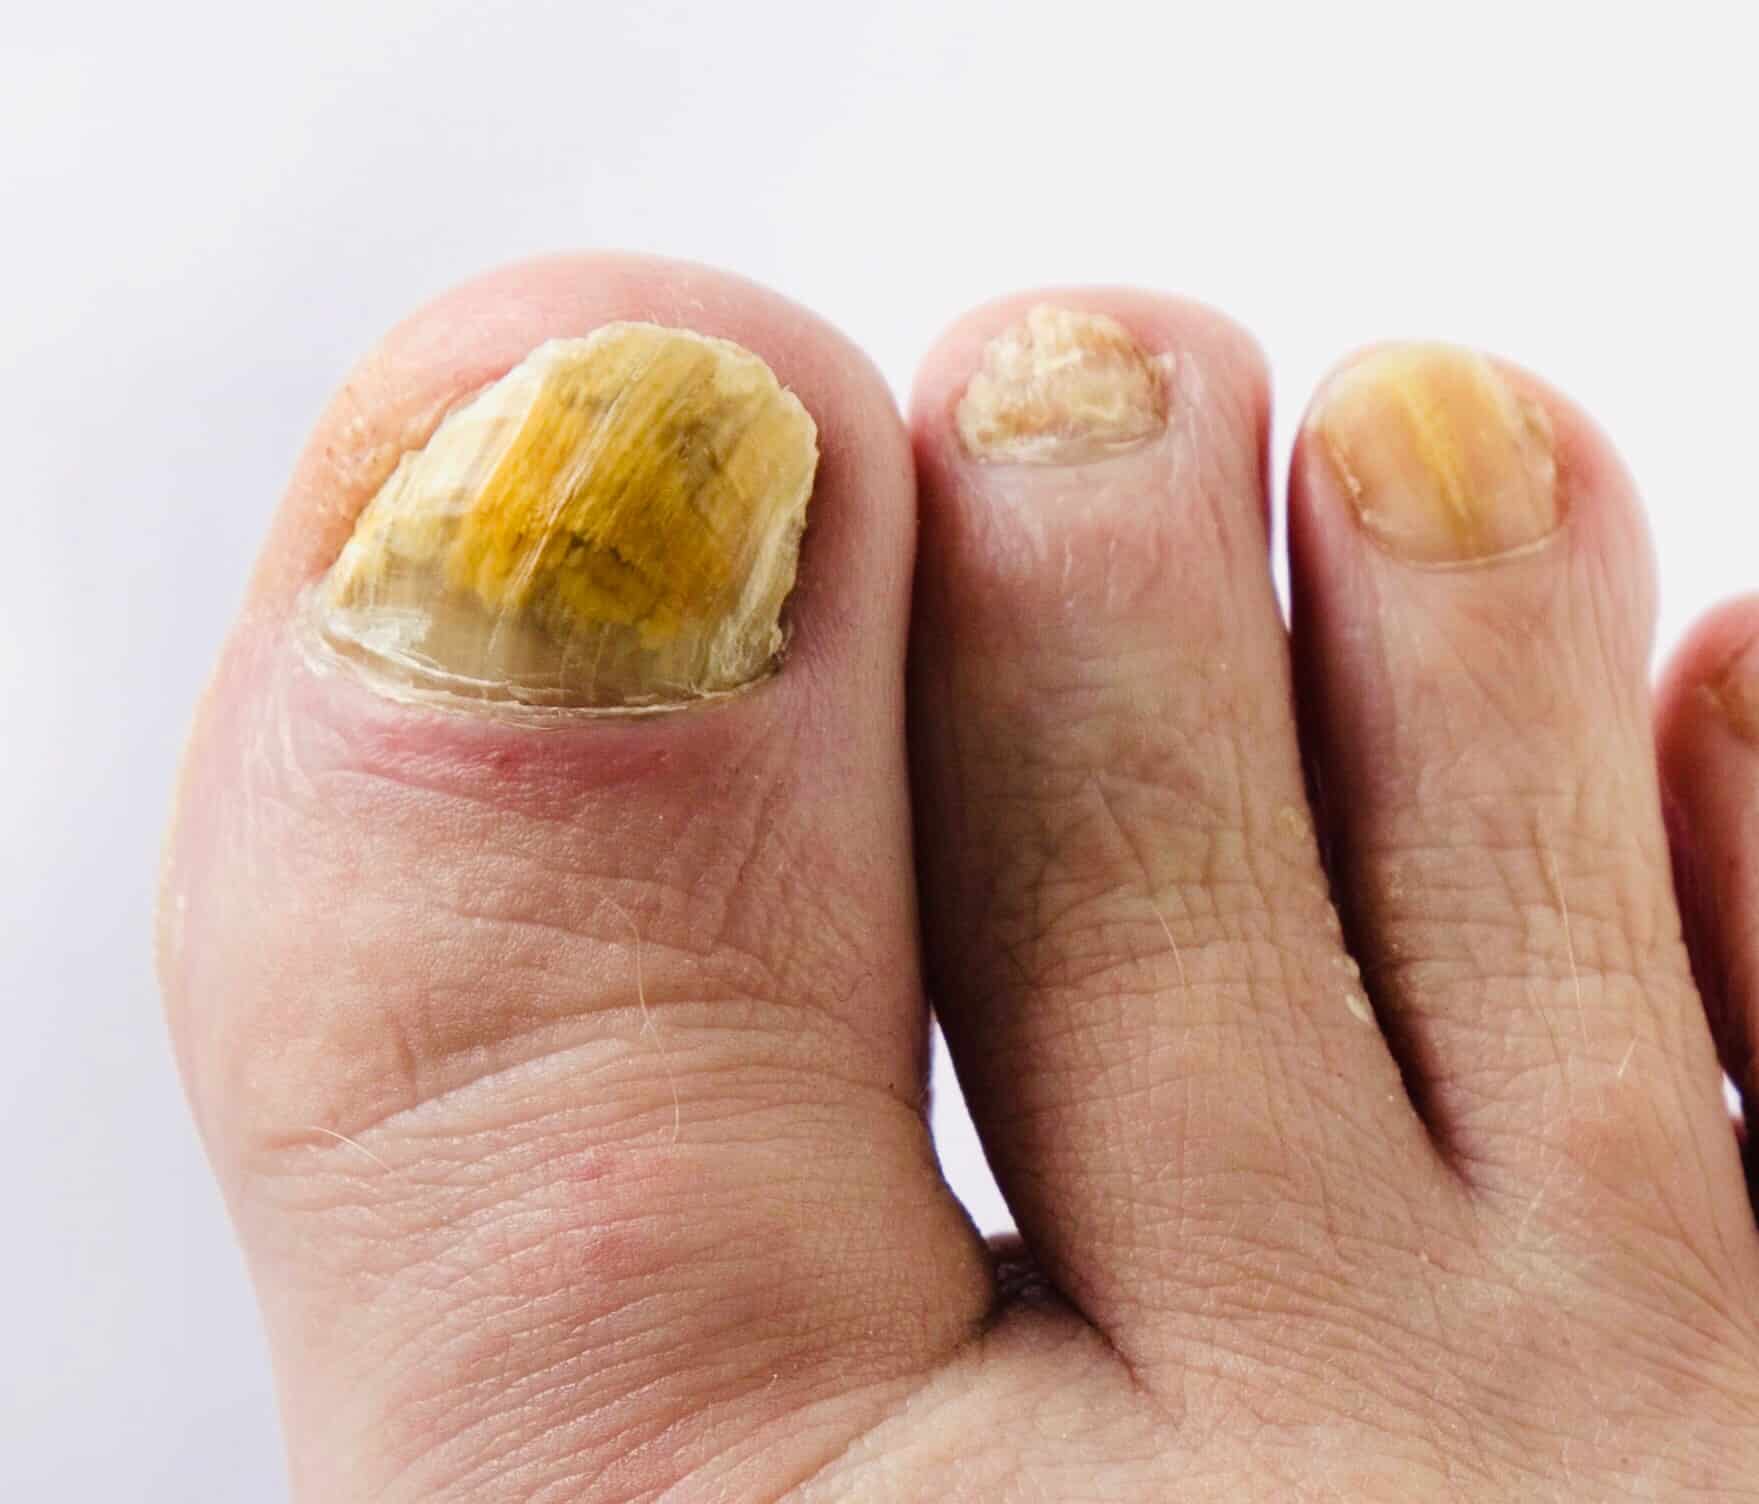 Fungal Nail Infection - Heavy